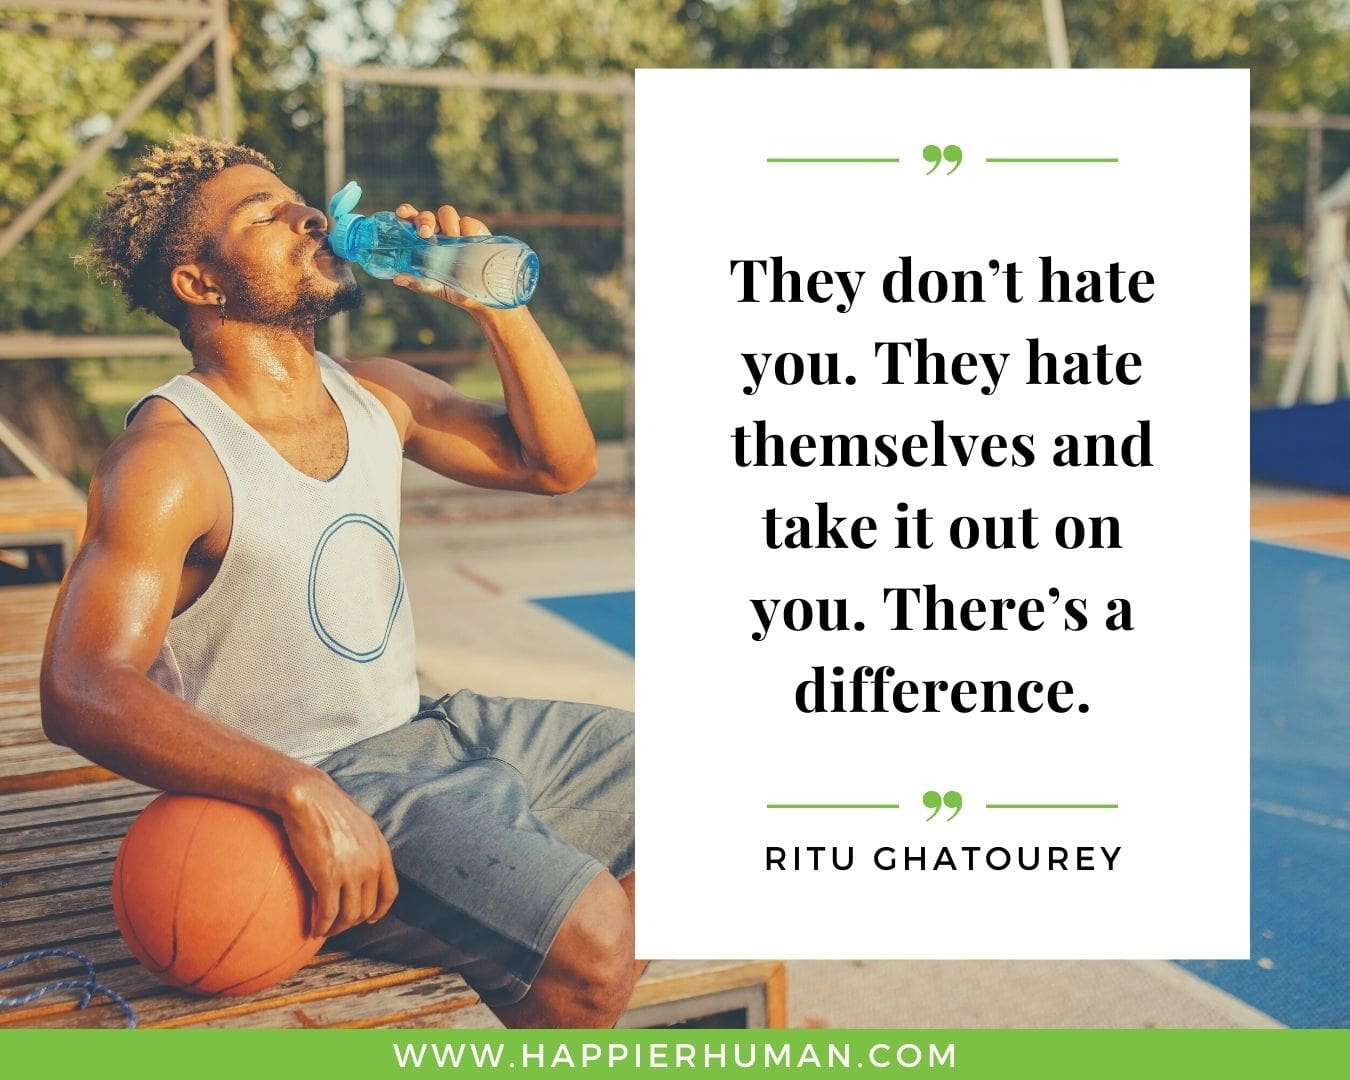 Haters Quotes - “They don’t hate you. They hate themselves and take it out on you. There’s a difference.” - Ritu Ghatourey